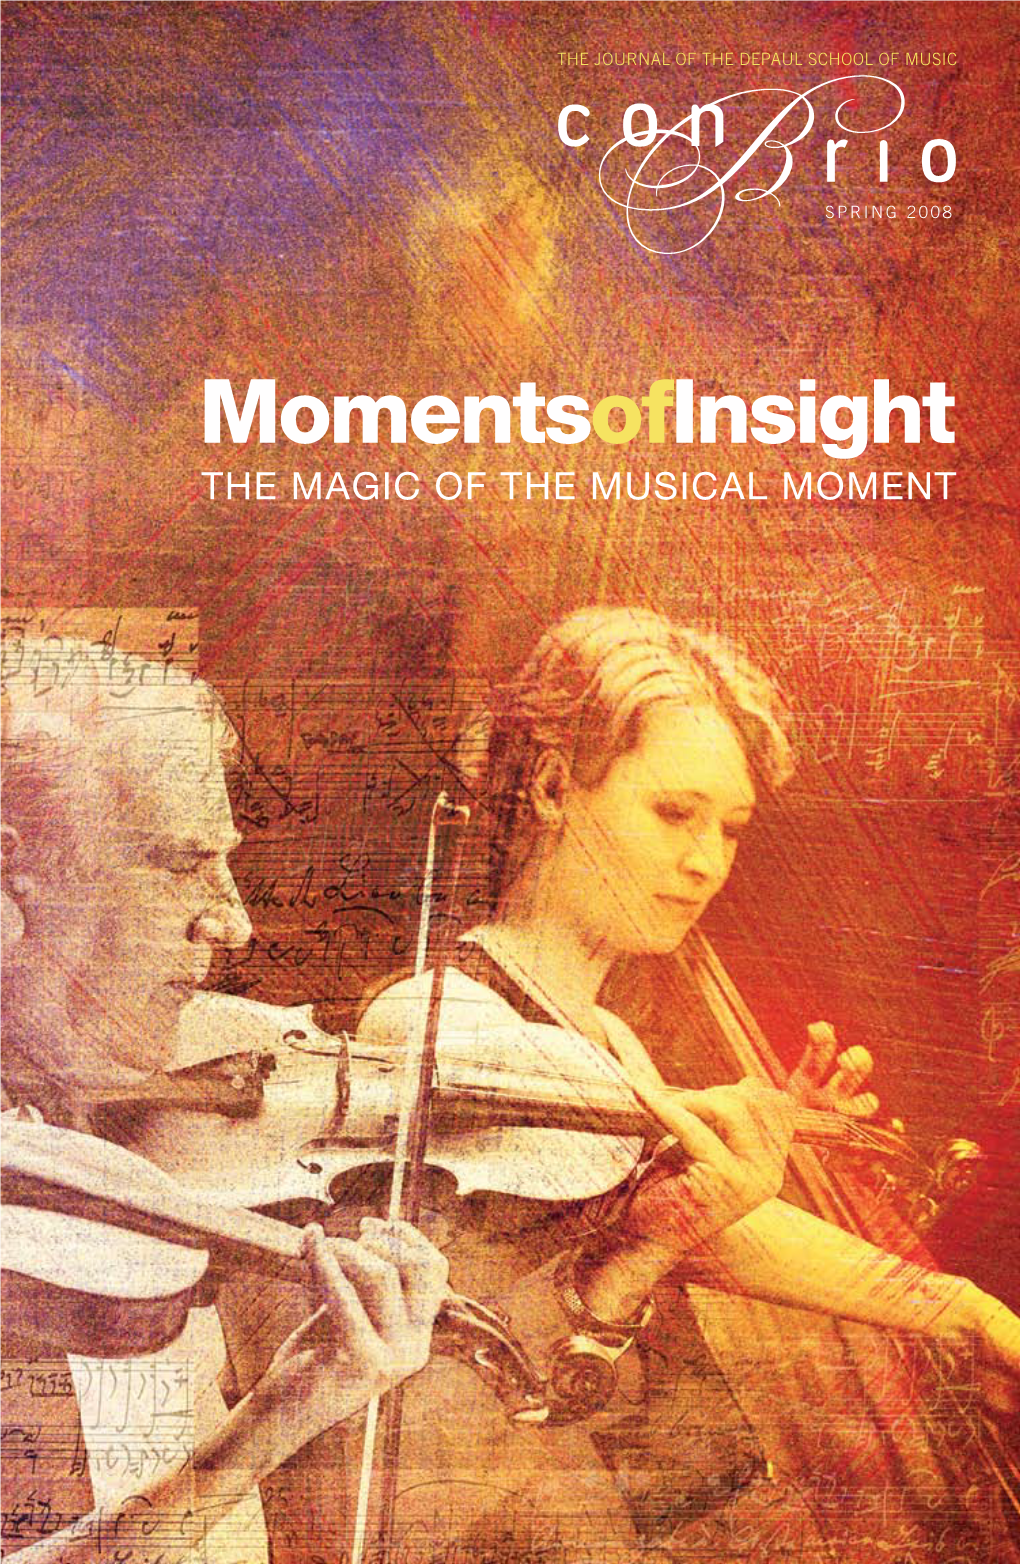 Momentsofinsight the Magic of the Musical Moment Ii Con Brio • SPRING 2008 the Journal of the Depaul School of Music 1